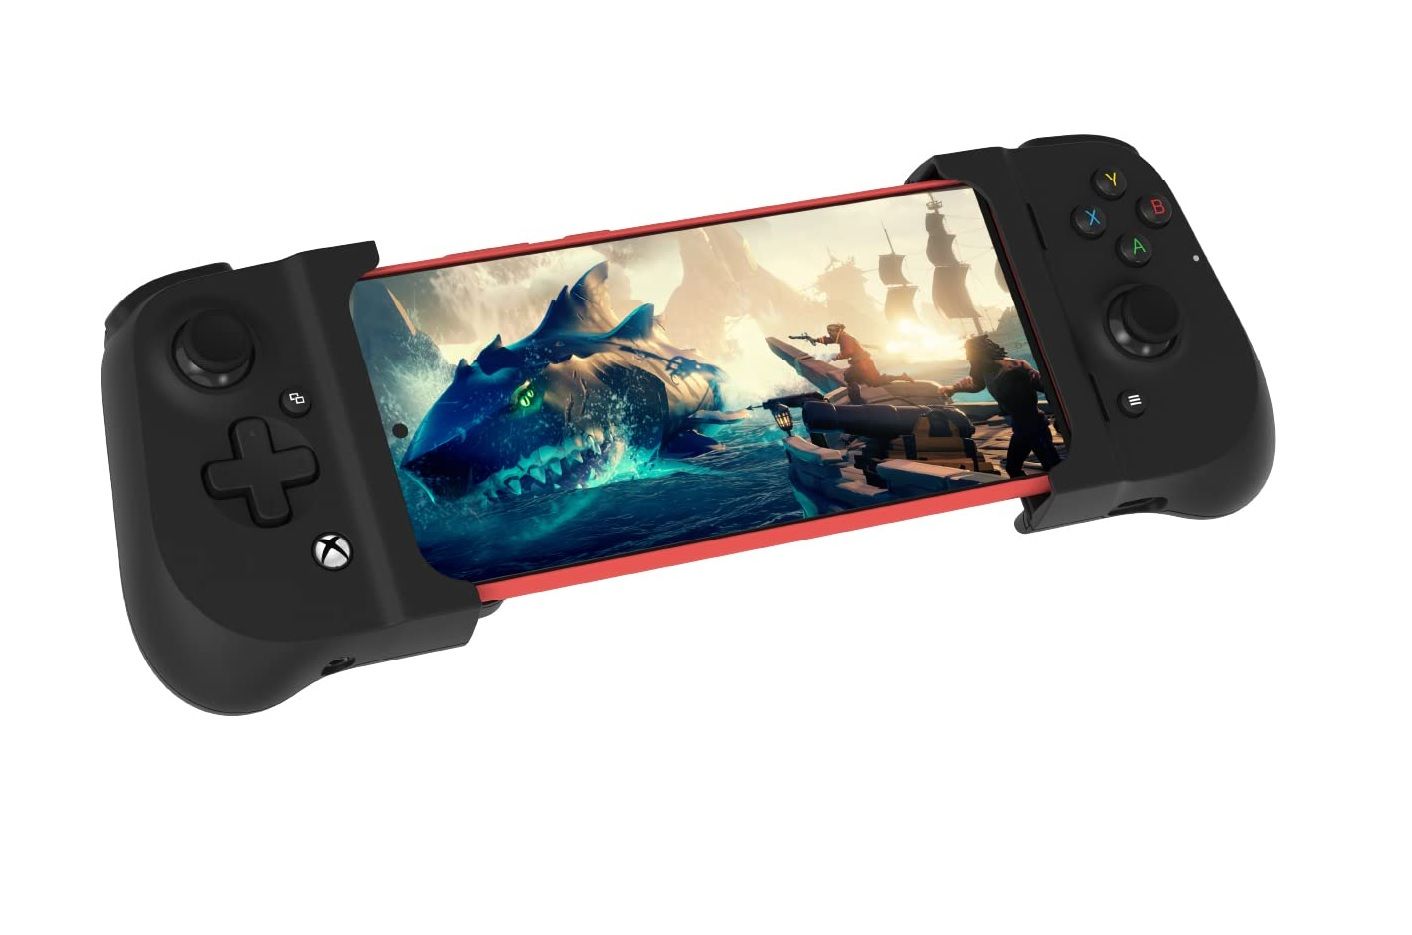 Gamevice FLEX Mobile Game Controller fitted to an Android smartphone